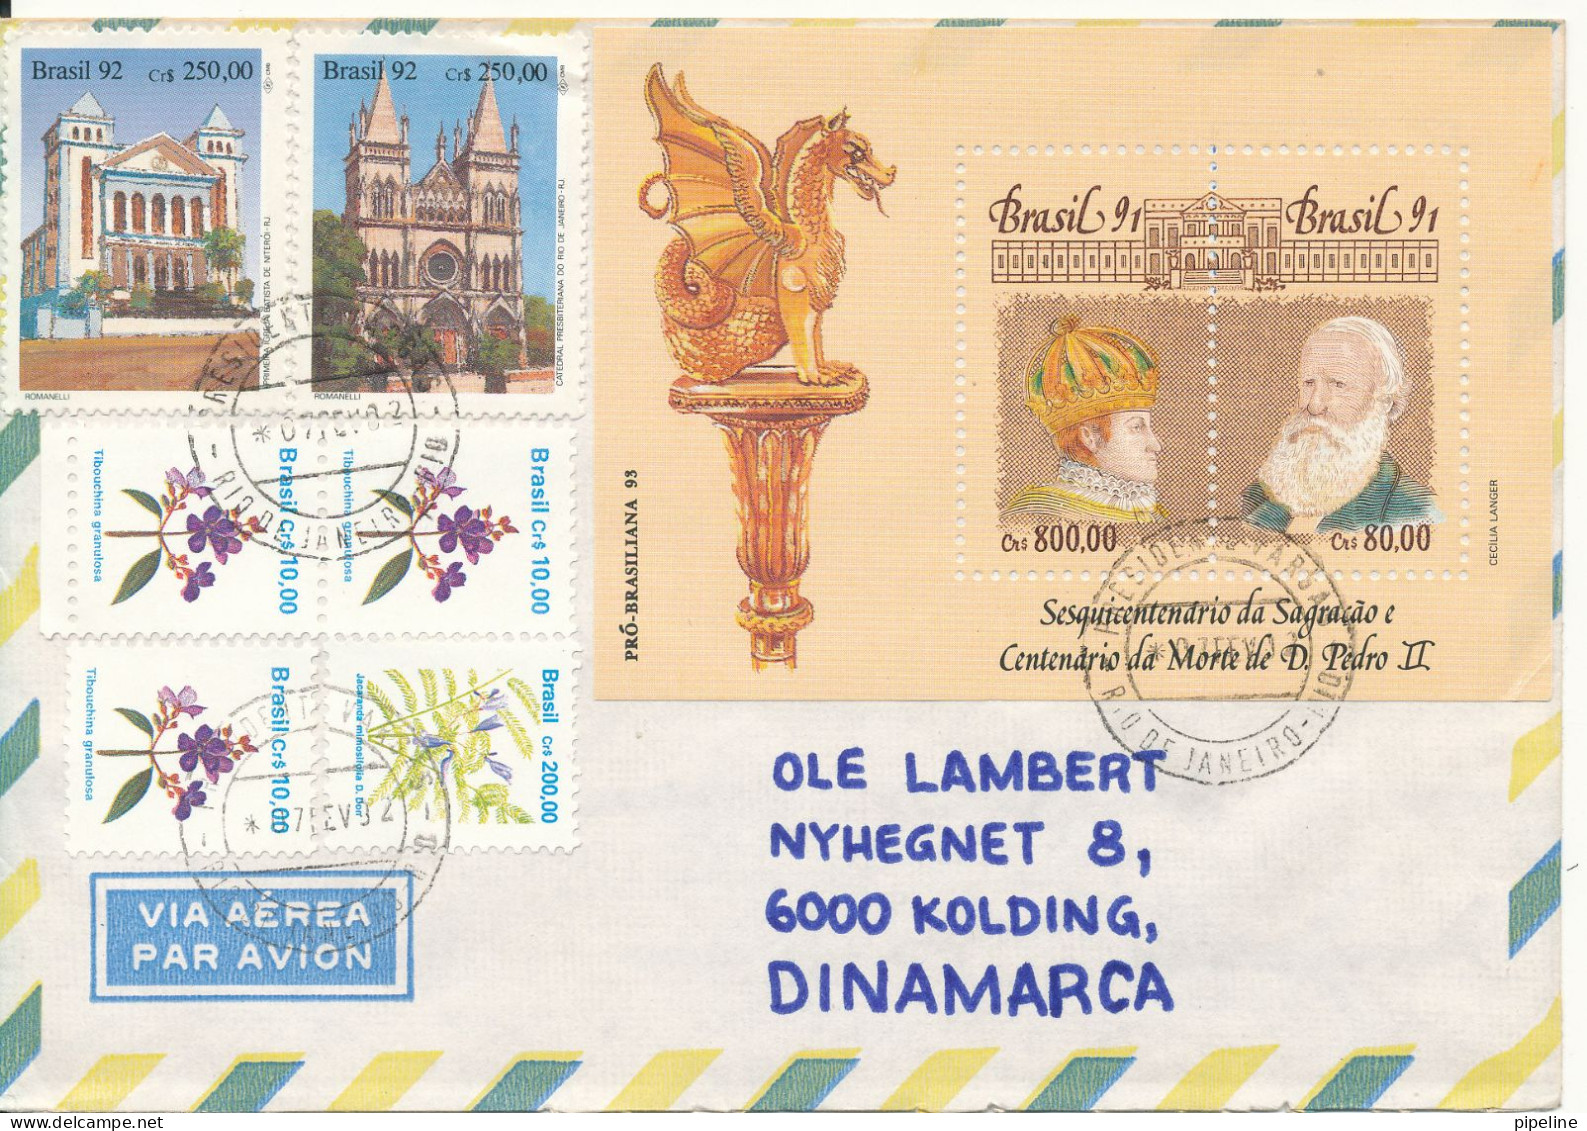 Brazil Air Mail Cover Sent To Denmark 17-2-1992 Topic Stamps And A Souvenir Sheet - Posta Aerea